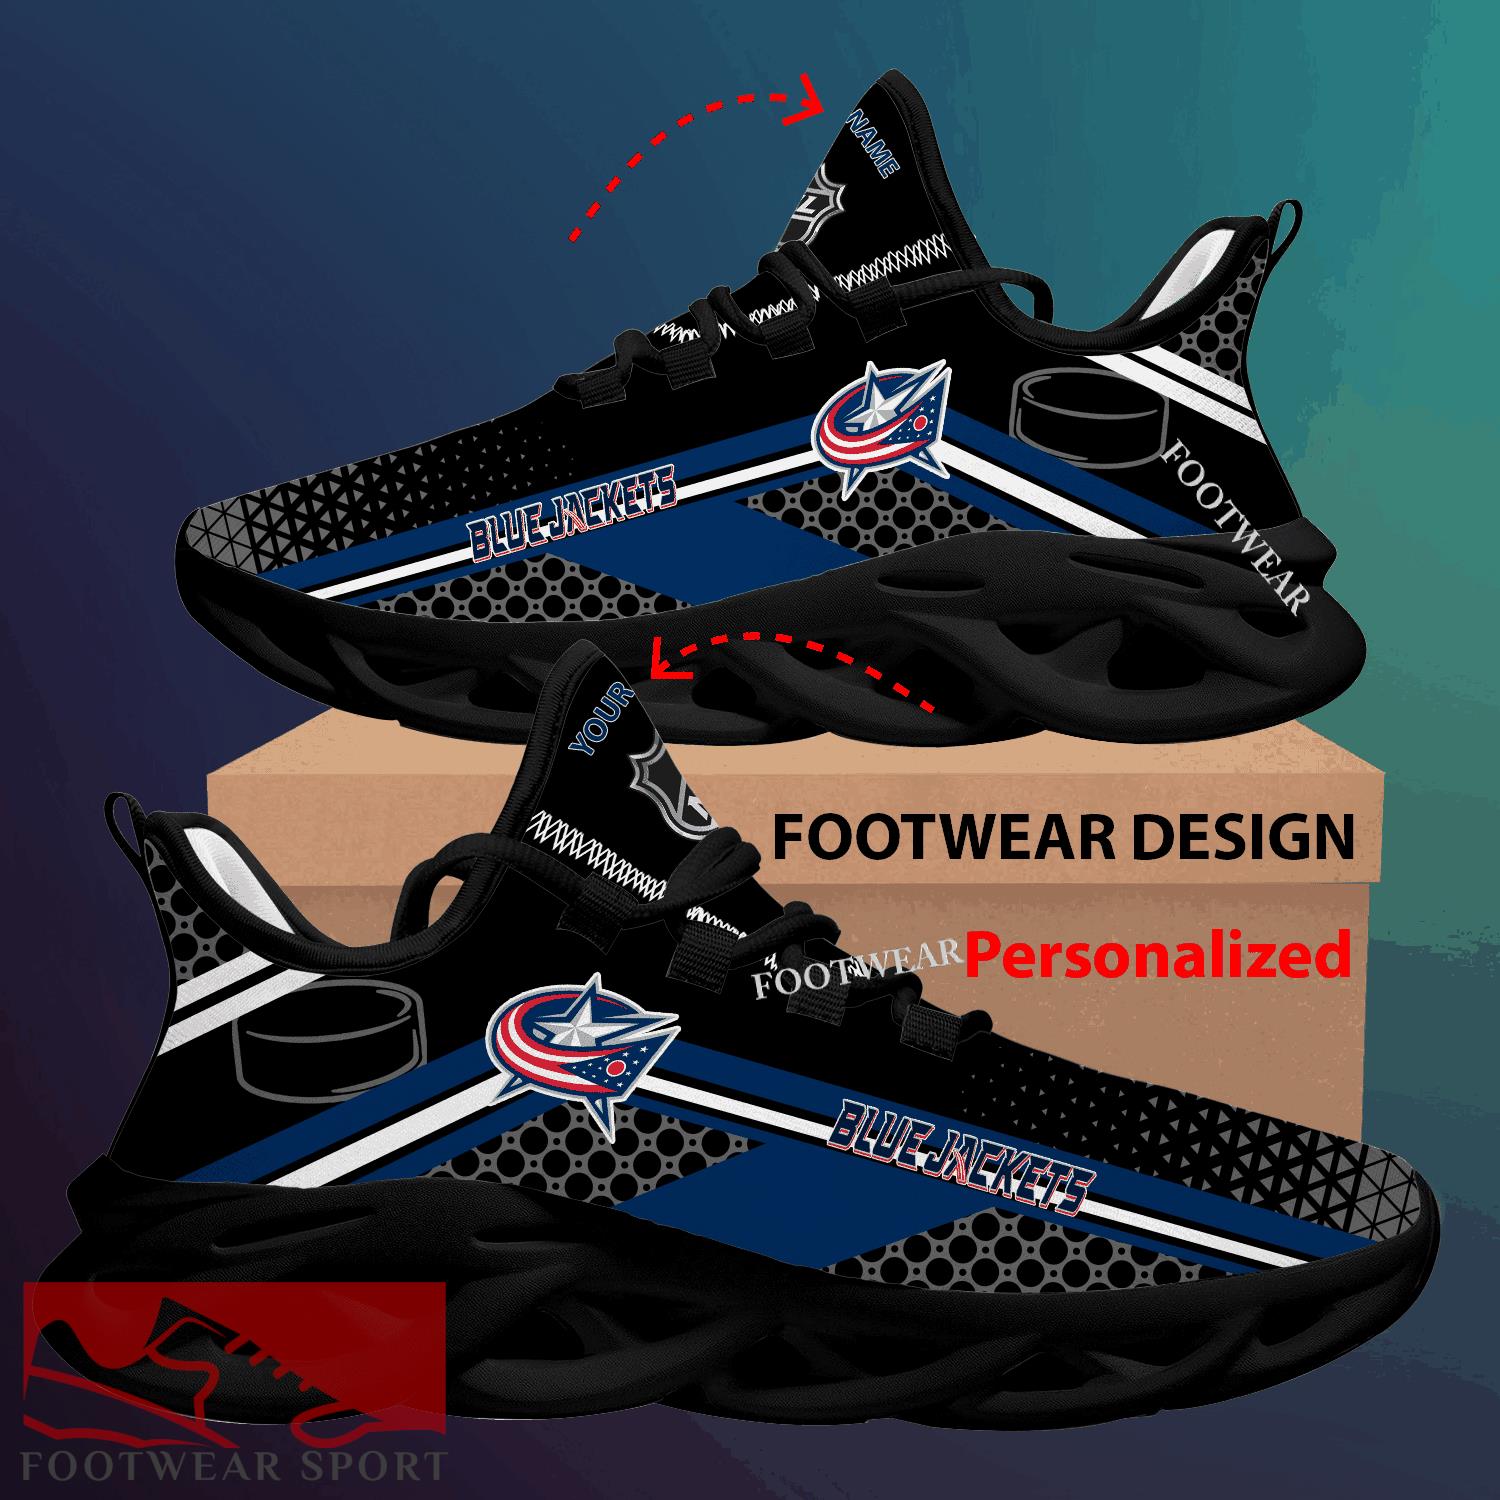 Columbus Blue Jackets Max Soul Shoes New Season Personalized For Men Women Running Sneaker Energize Fans - NHL Columbus Blue Jackets Max Soul Shoes New Season Personalized Photo 2